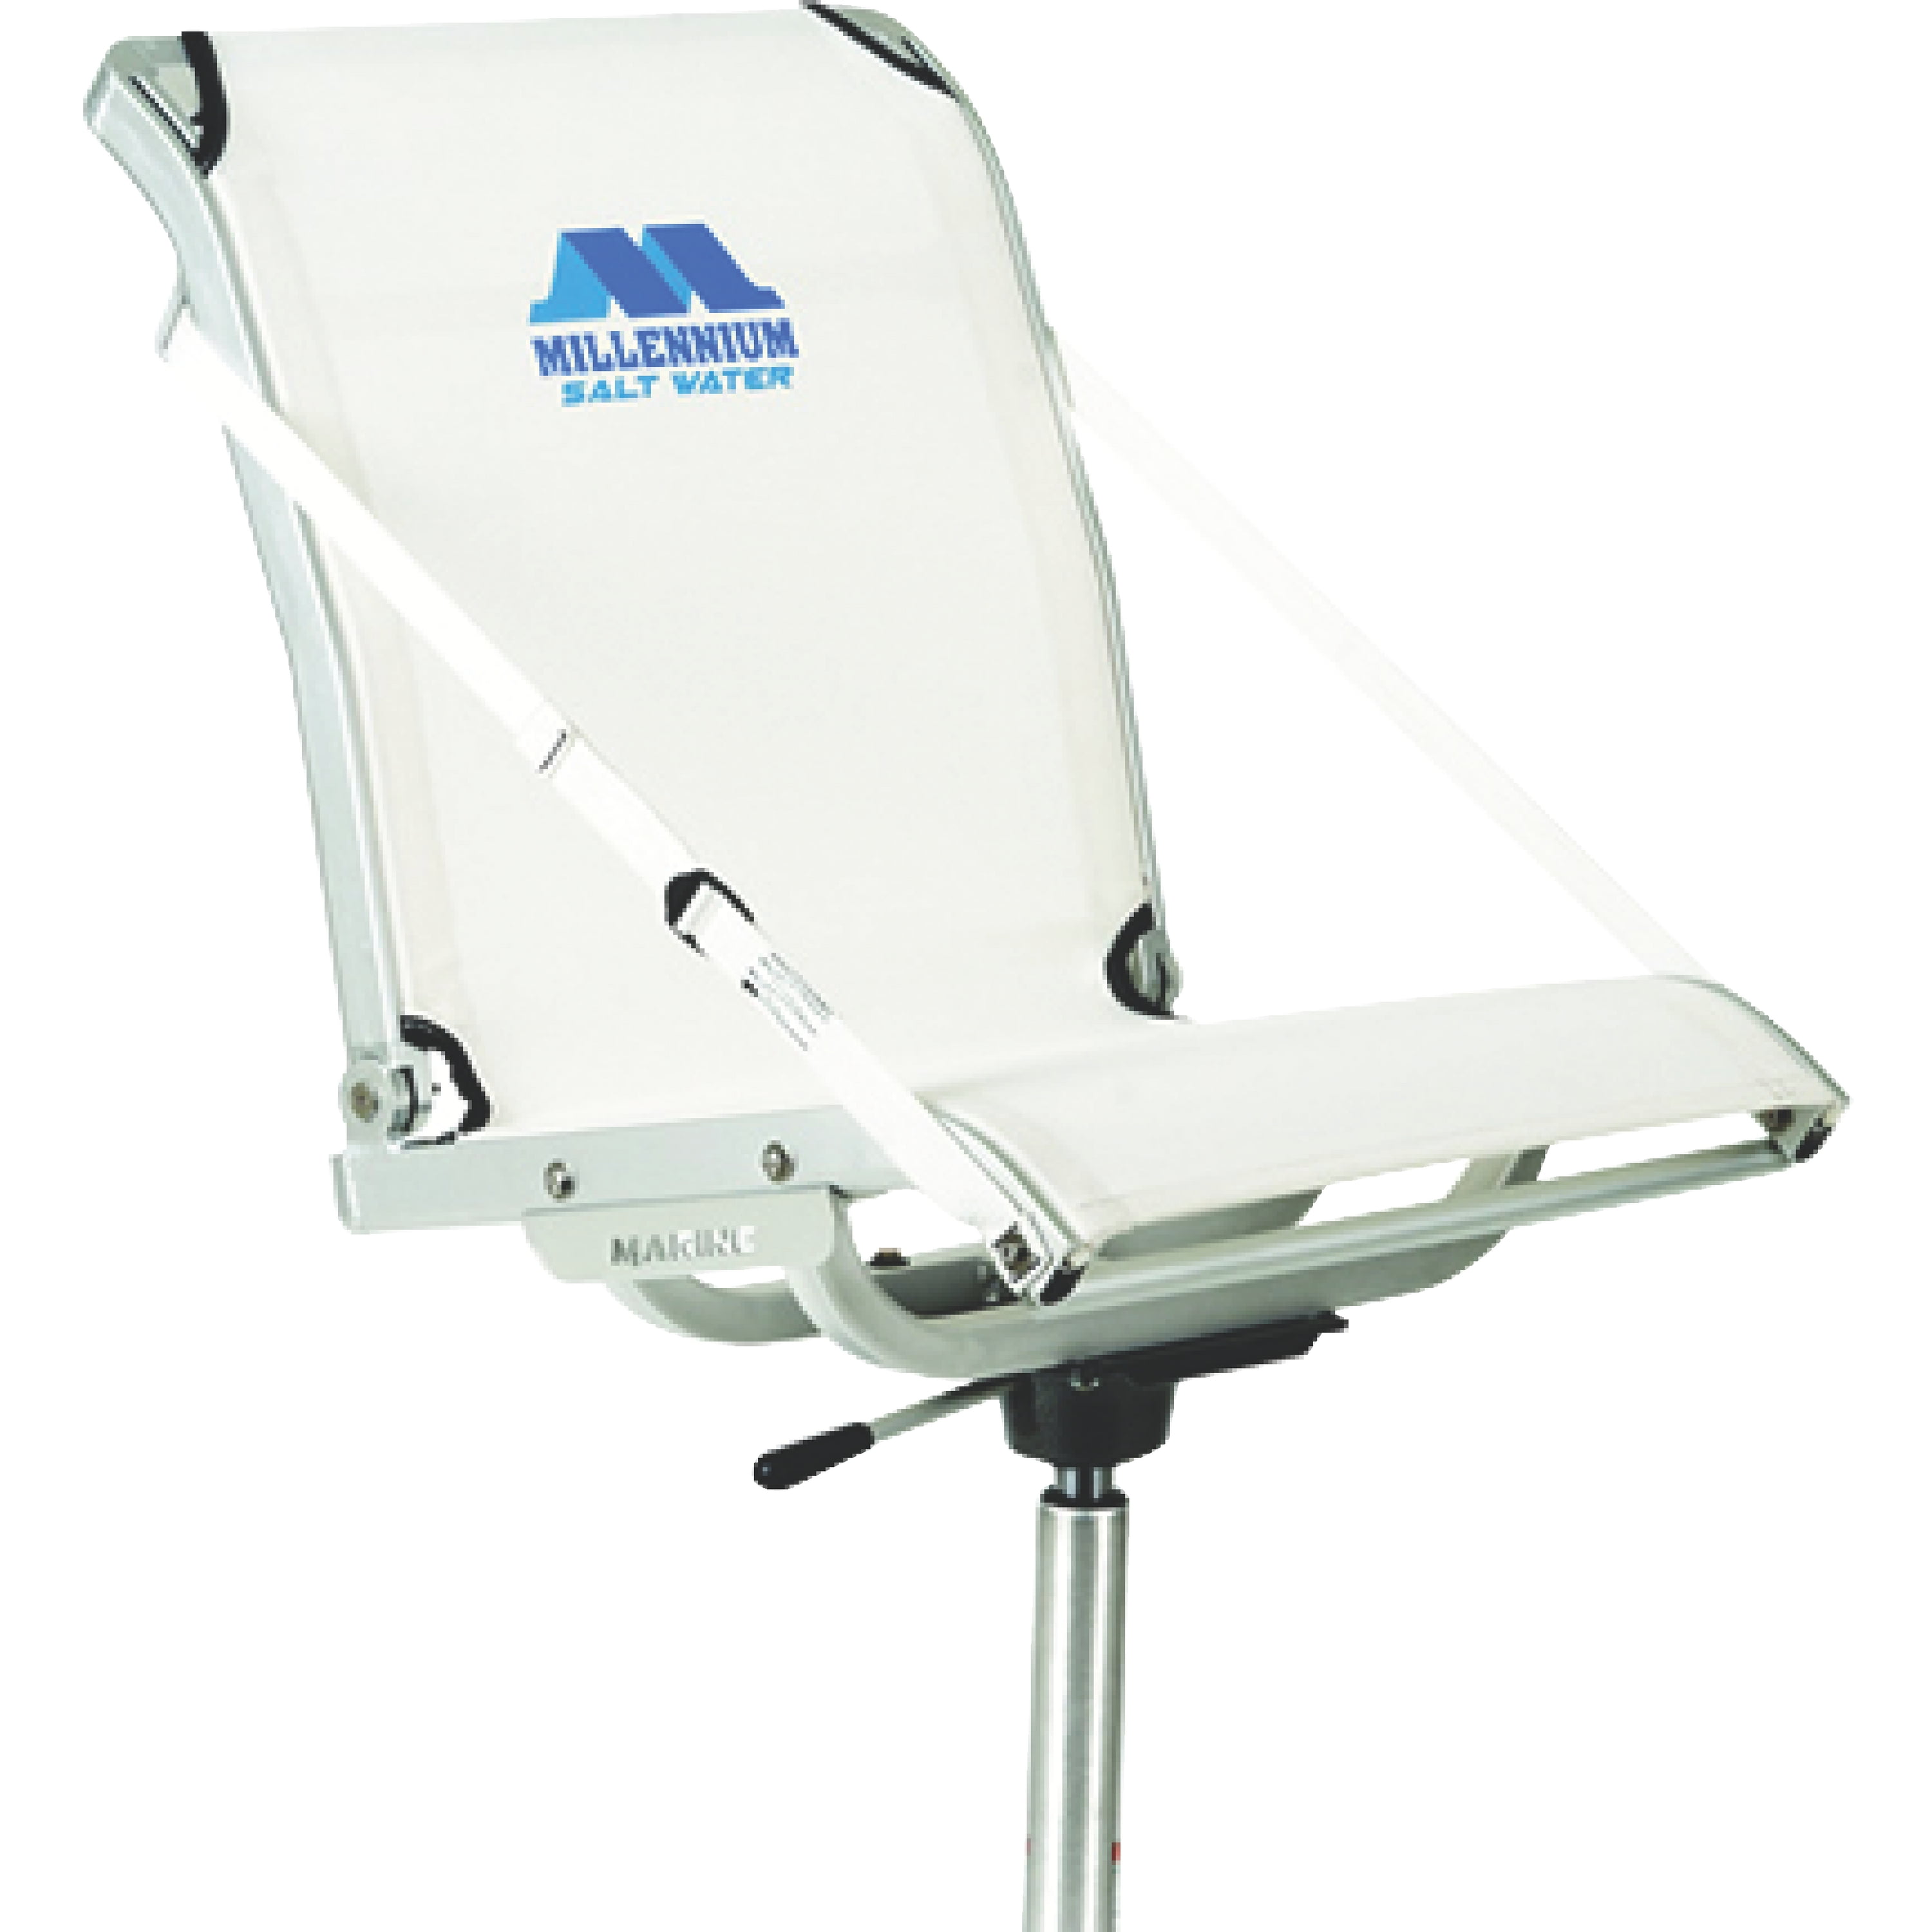 SPECIAL MILLENNIUM B100gy BOAT SEAT WITH MATCHING B200GN CASTING SEAT GREY 